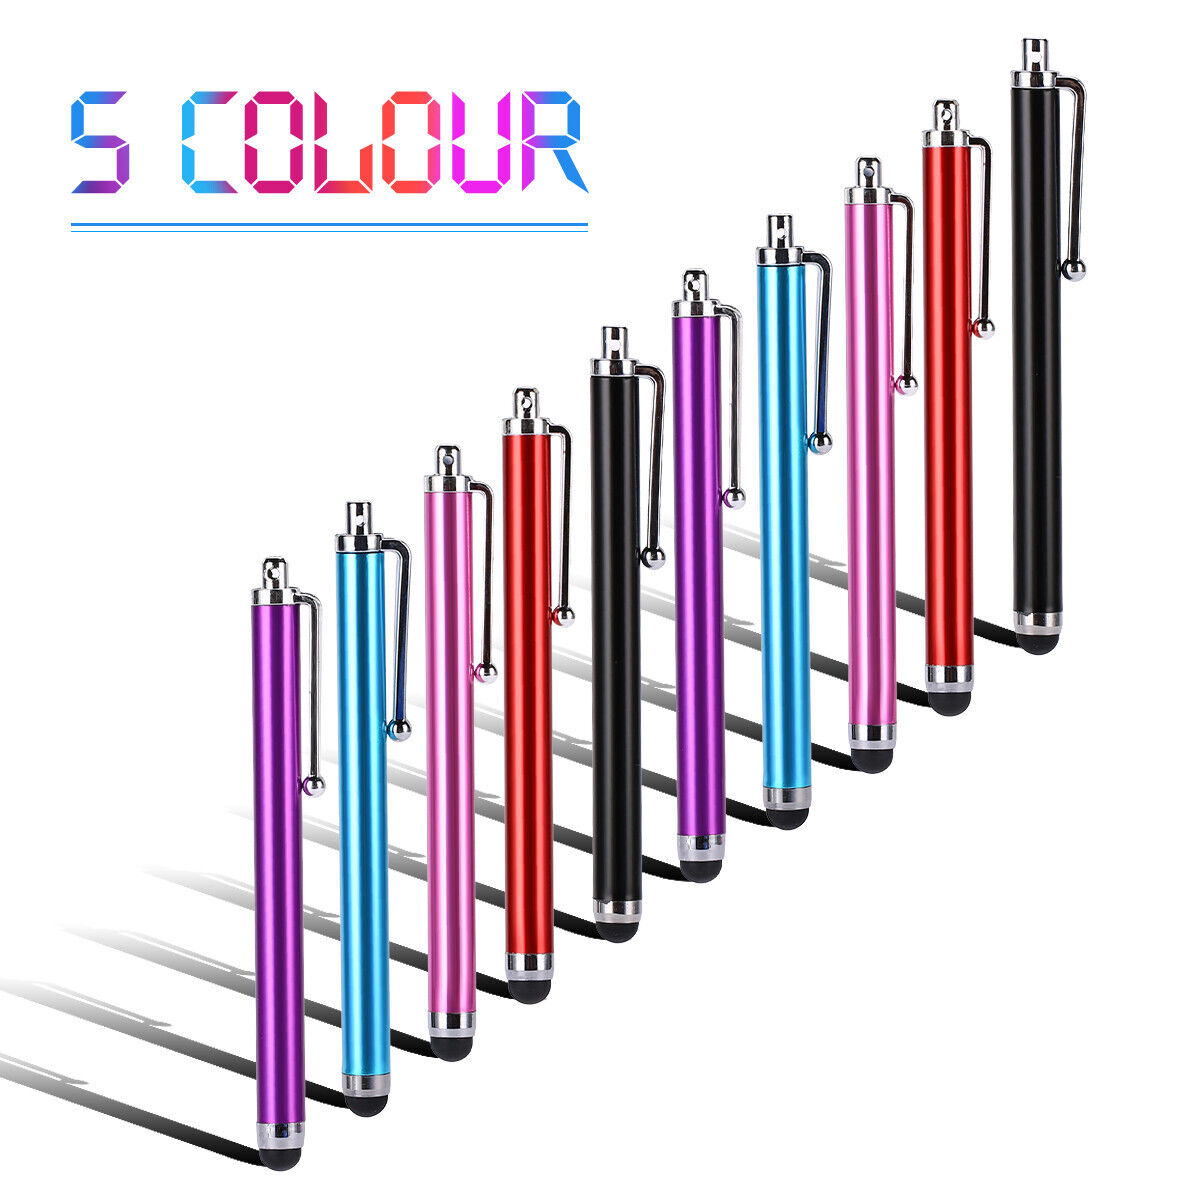 10 Capacitive Touch Screen Stylus Pen Universal For iPhone iPad Samsung Tablet Ombar Universal Touch Screen Stylus/Pen - фотография #2